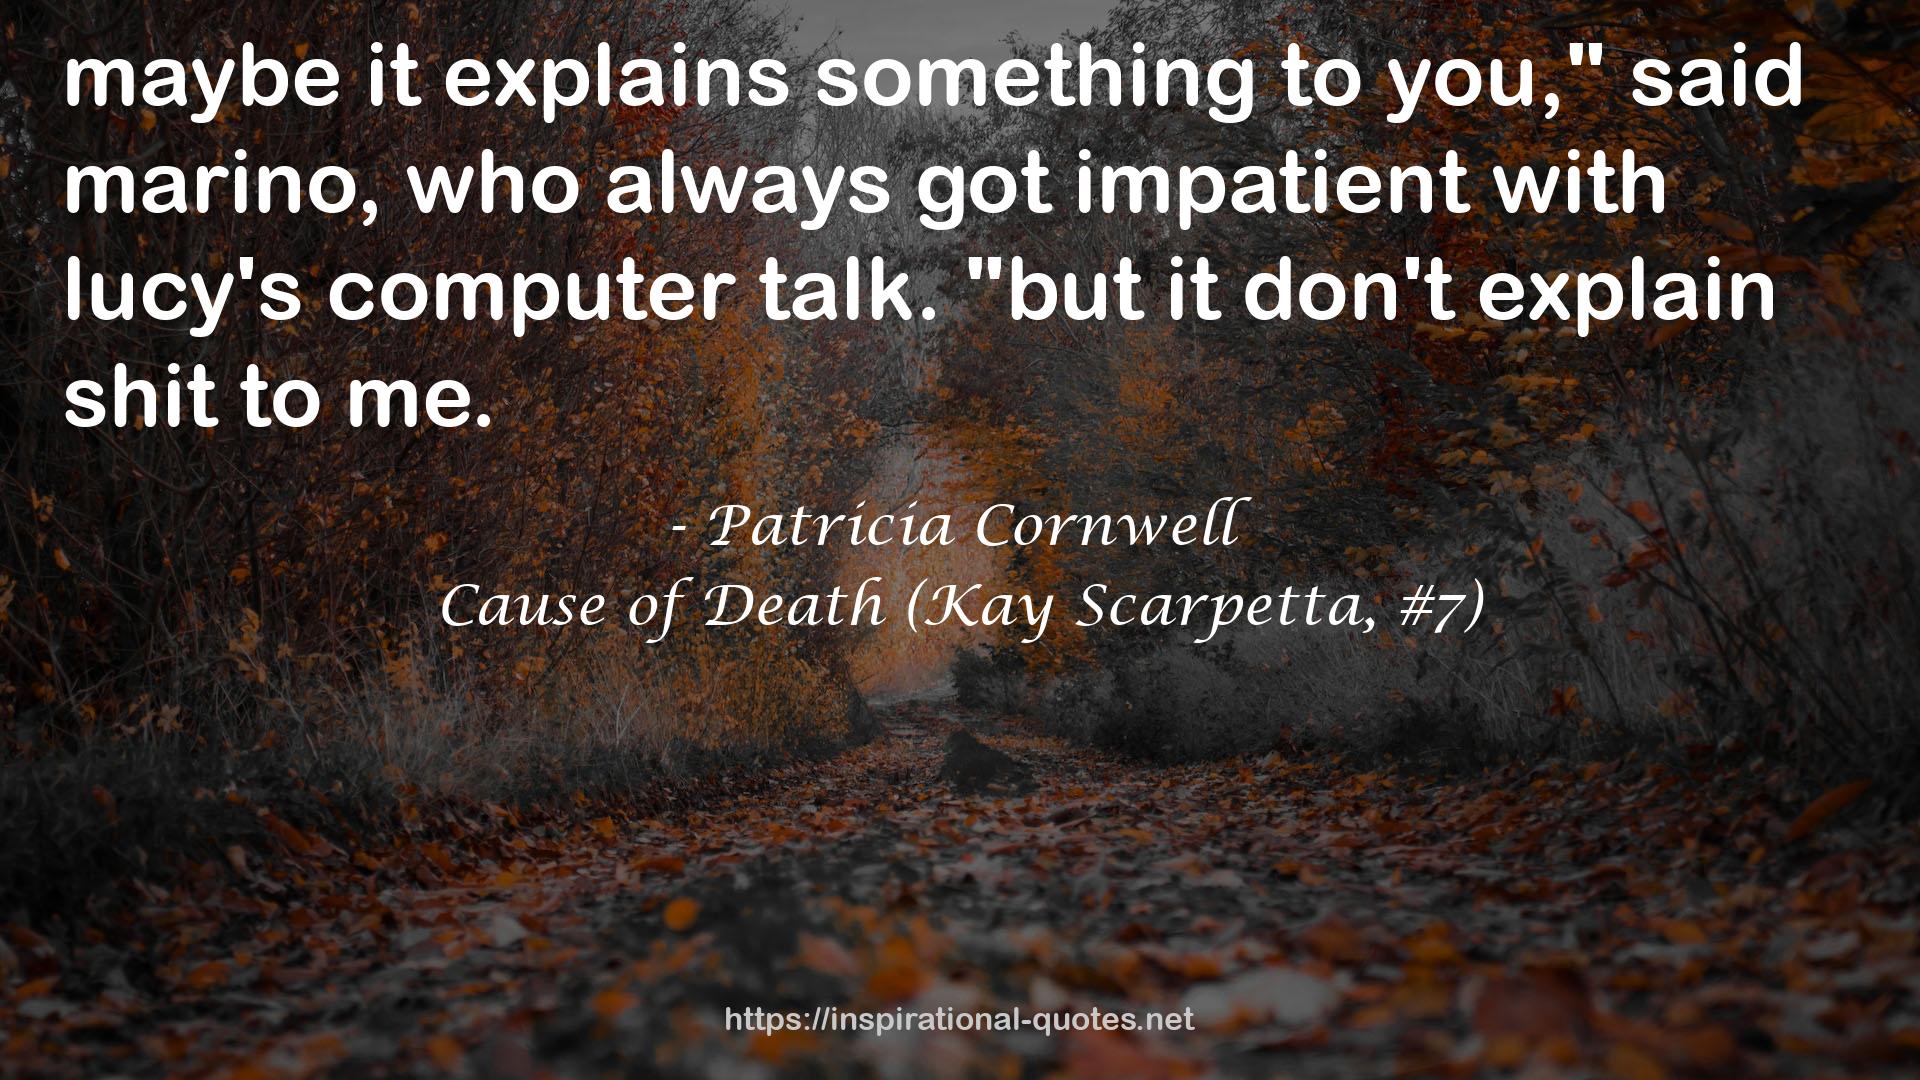 Cause of Death (Kay Scarpetta, #7) QUOTES